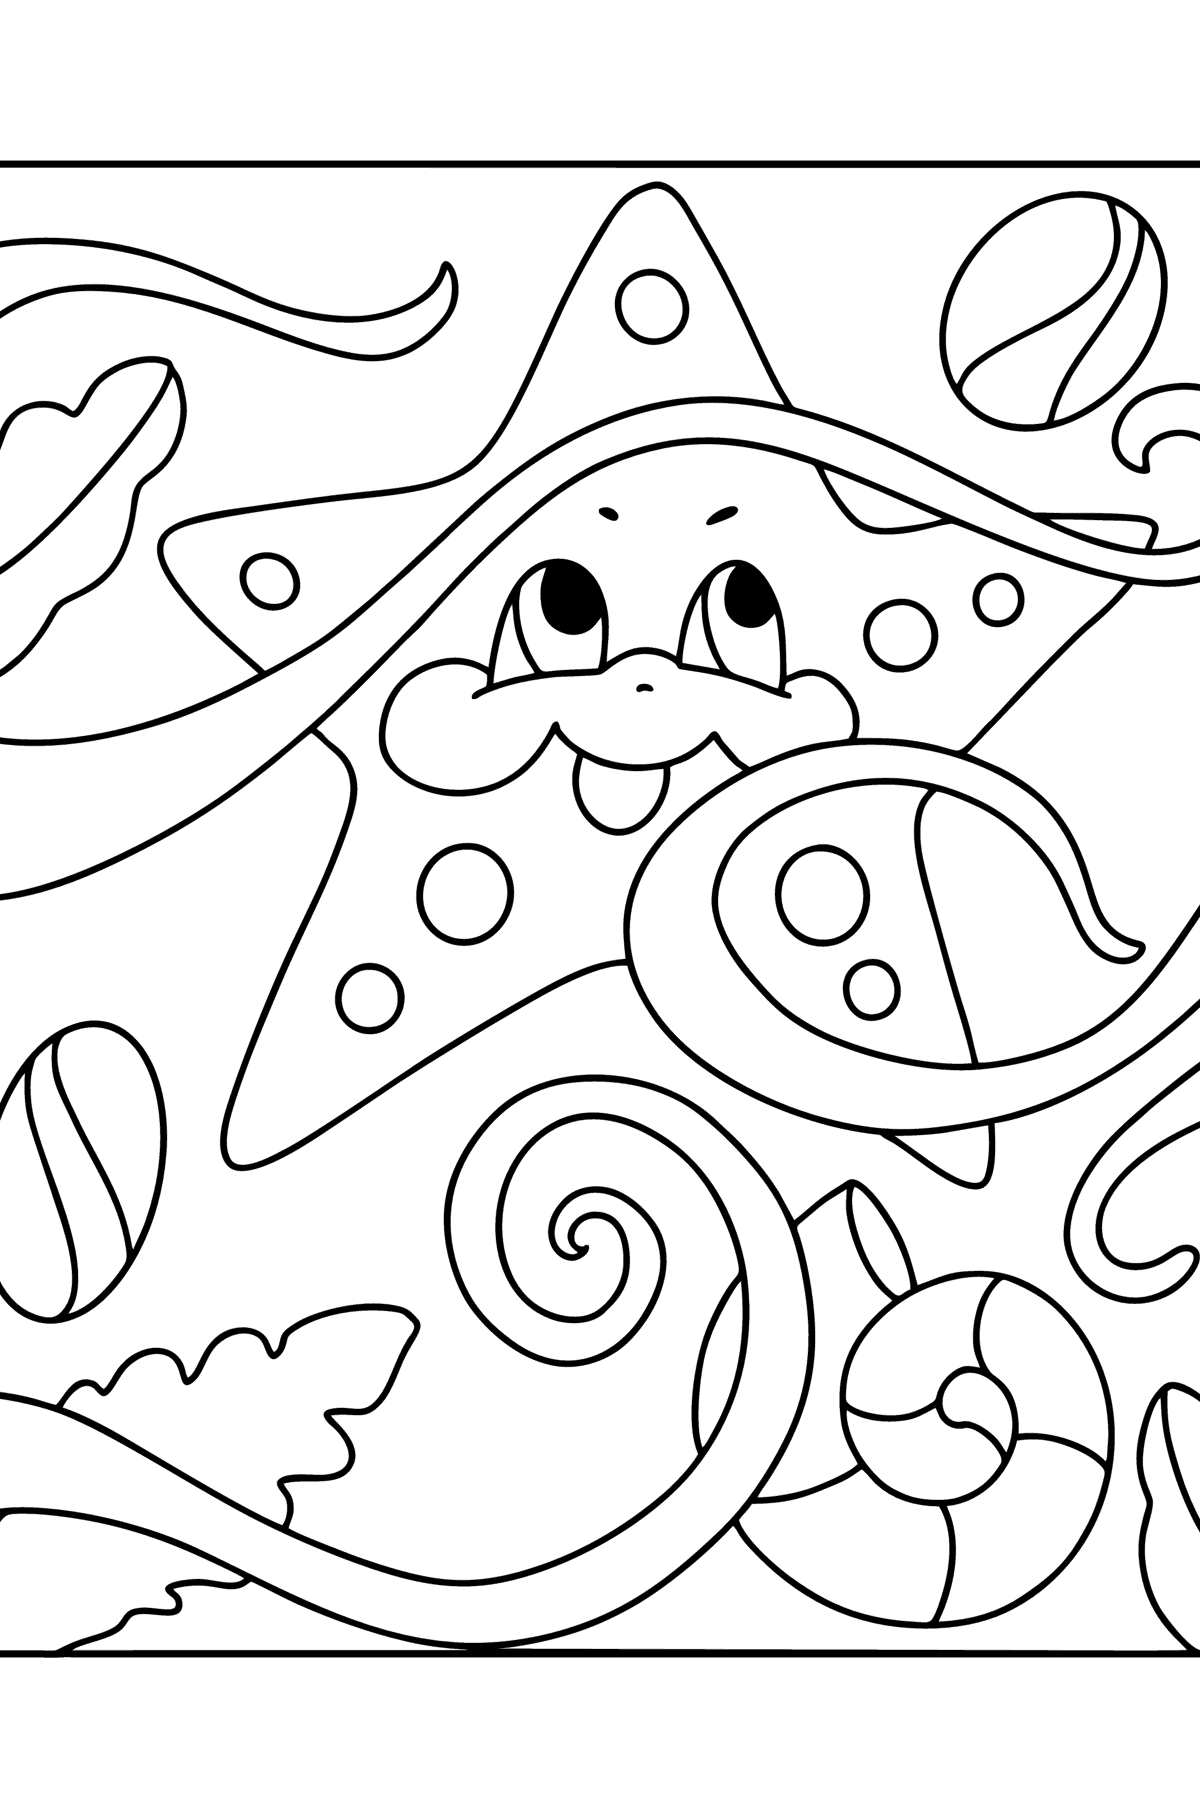 Baby starfish coloring page - Coloring Pages for Kids